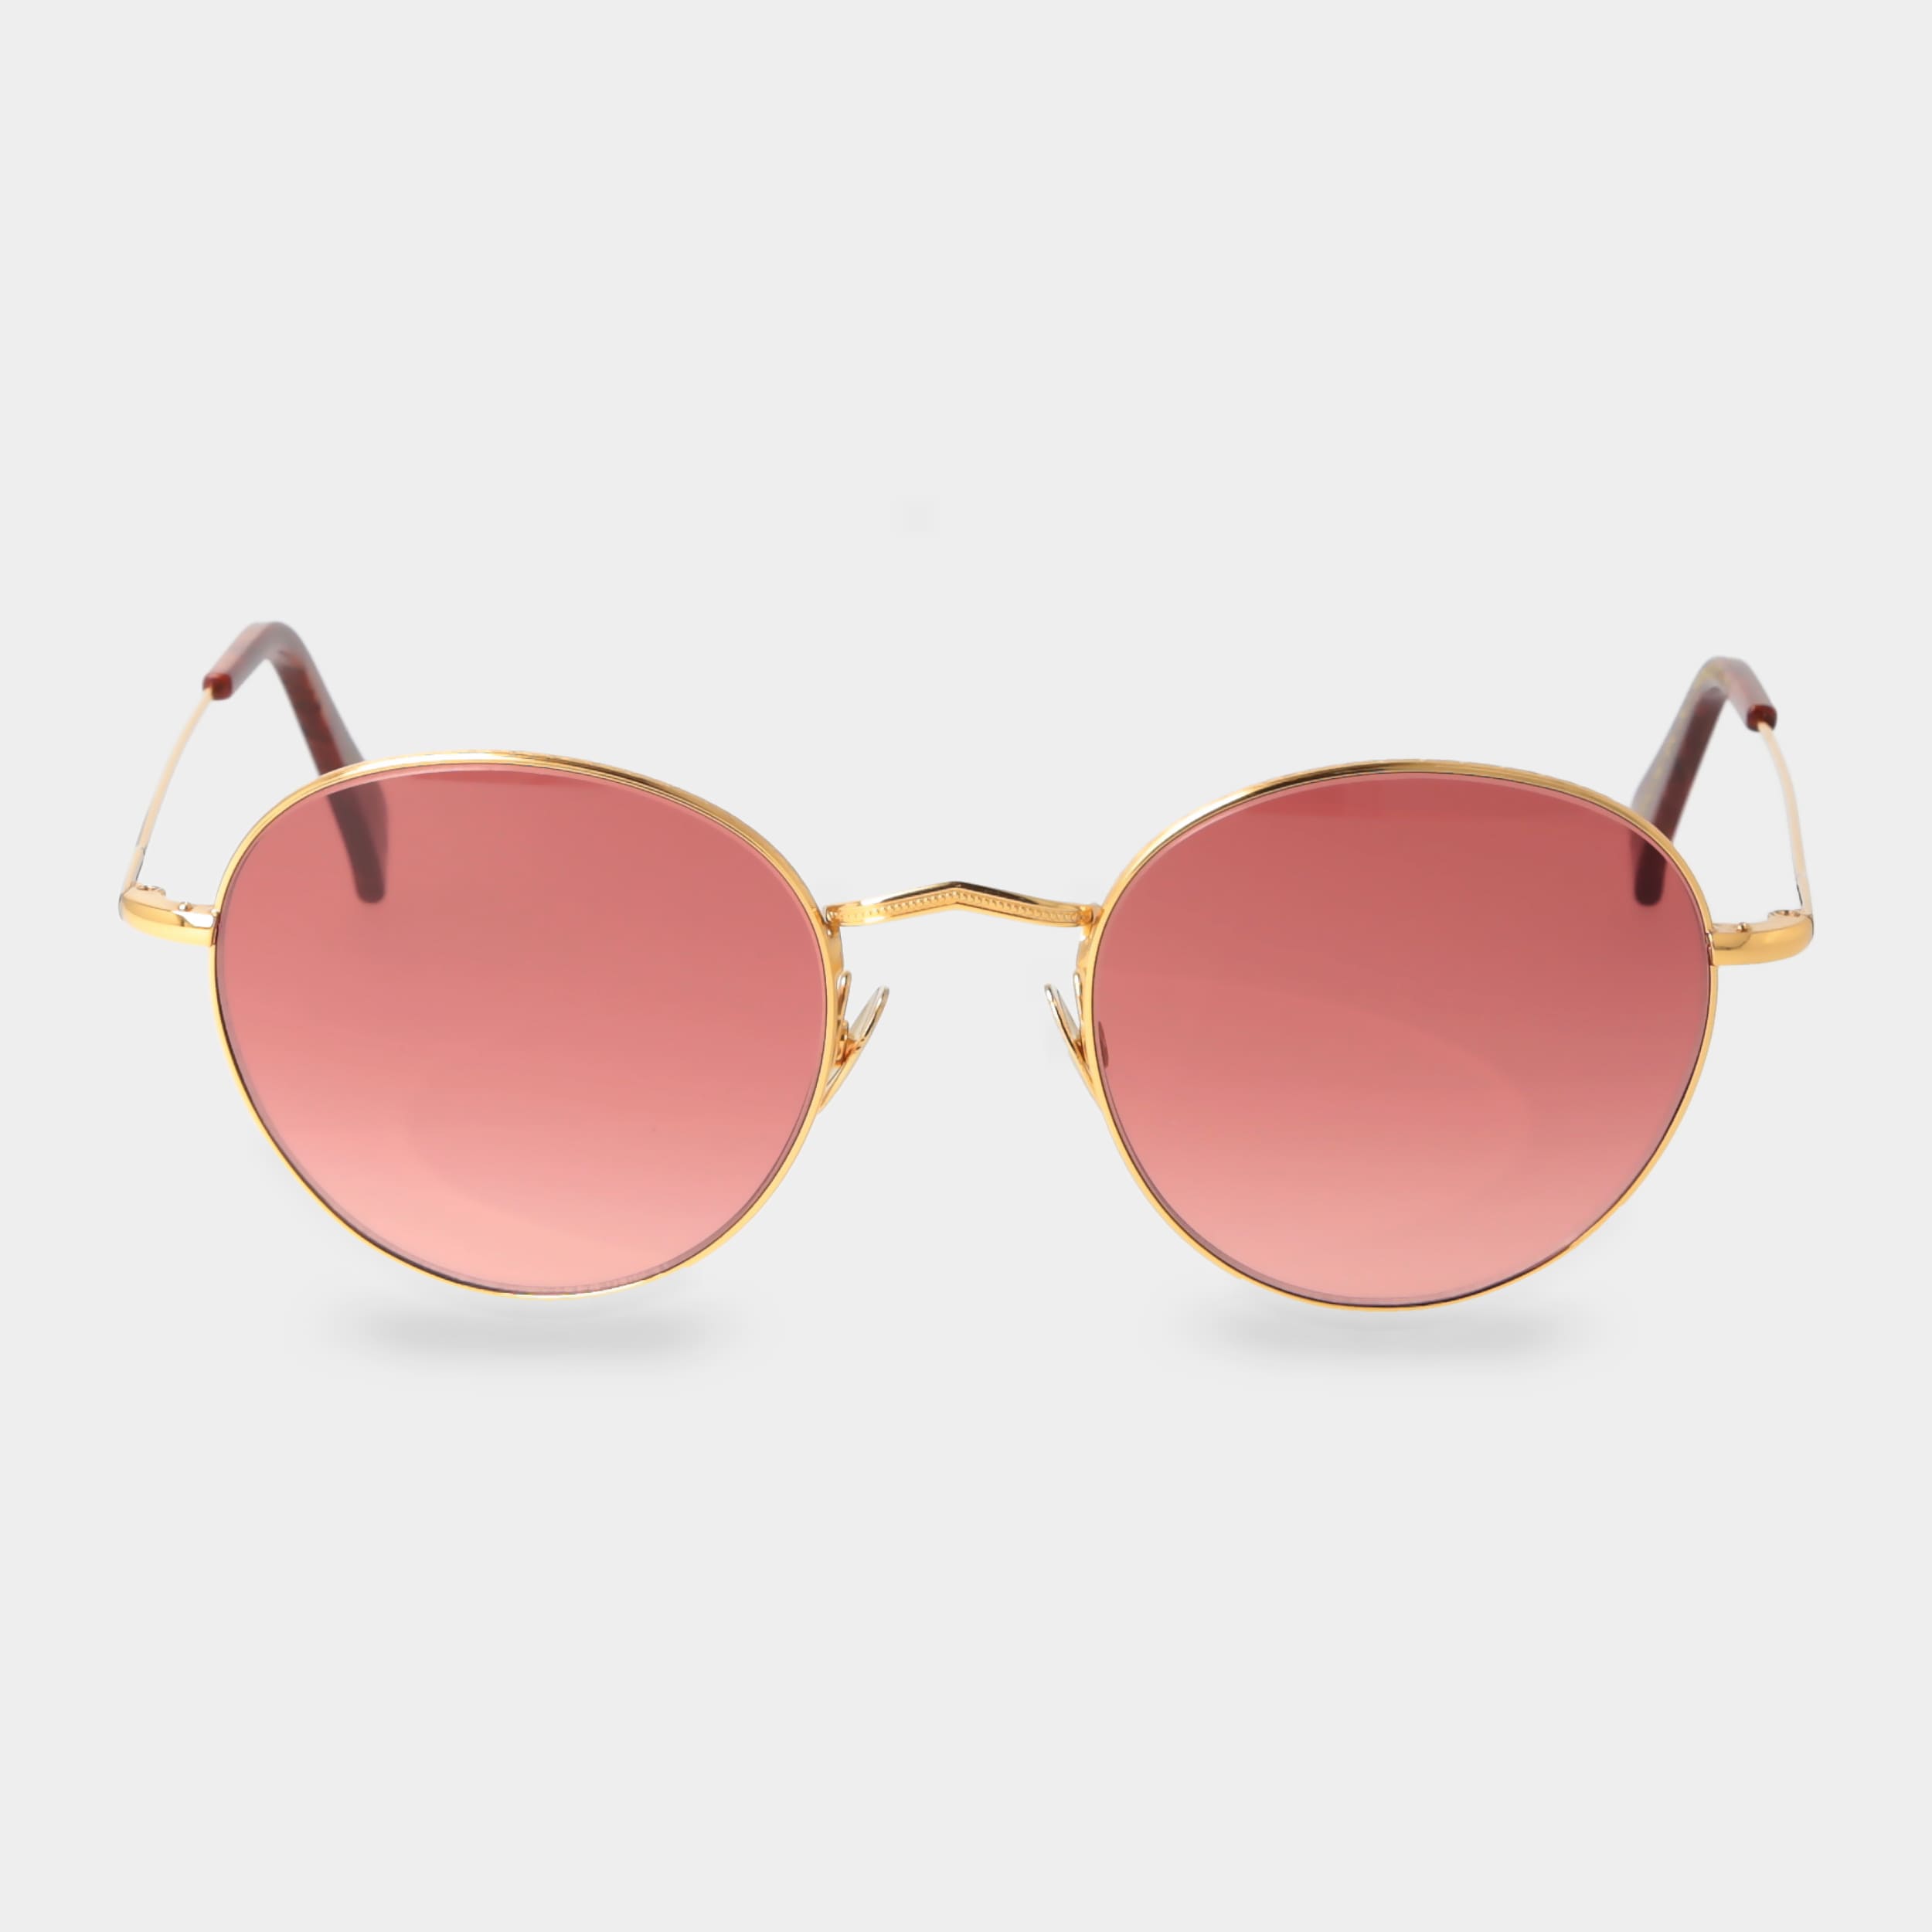 sunglasses-vicuna-gold-gradient-red-tbd-eyewear-front